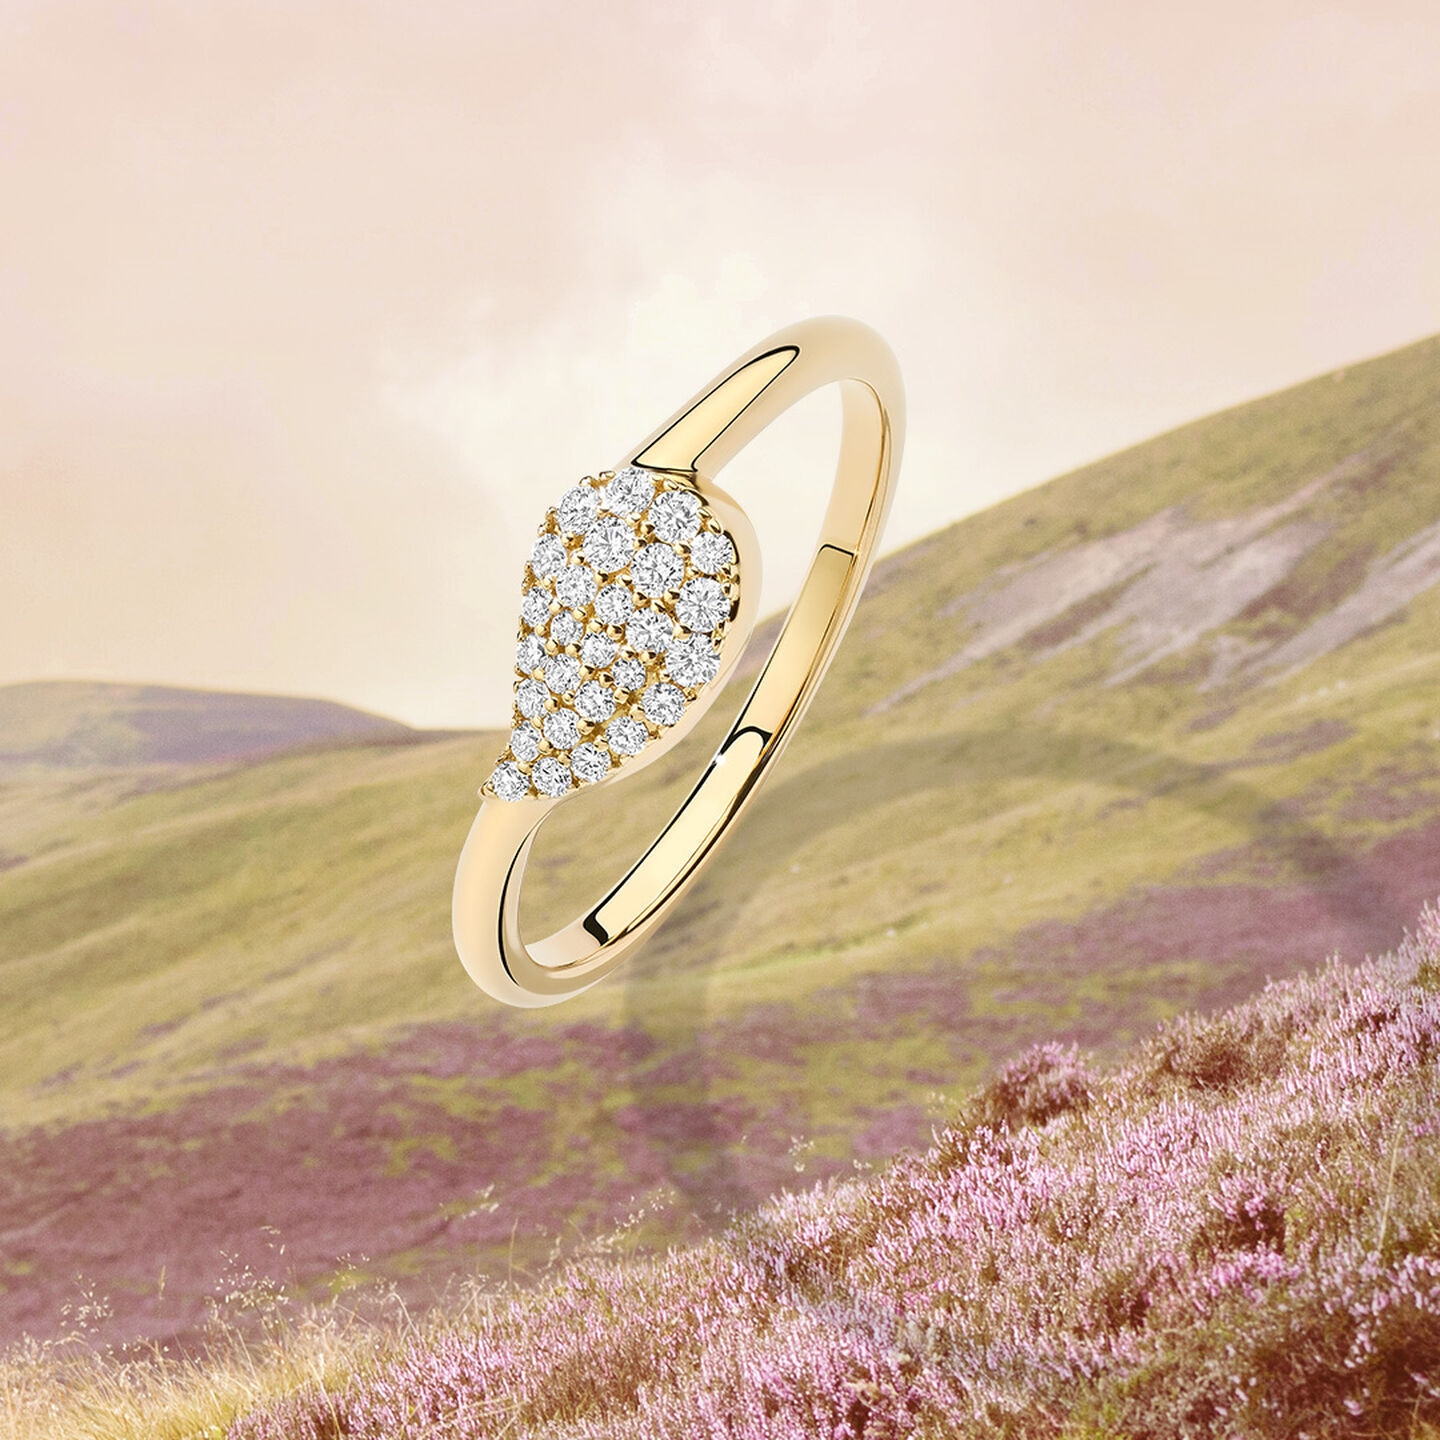 Yellow gold and diamond ring over a background of wildflowers on a hillside.